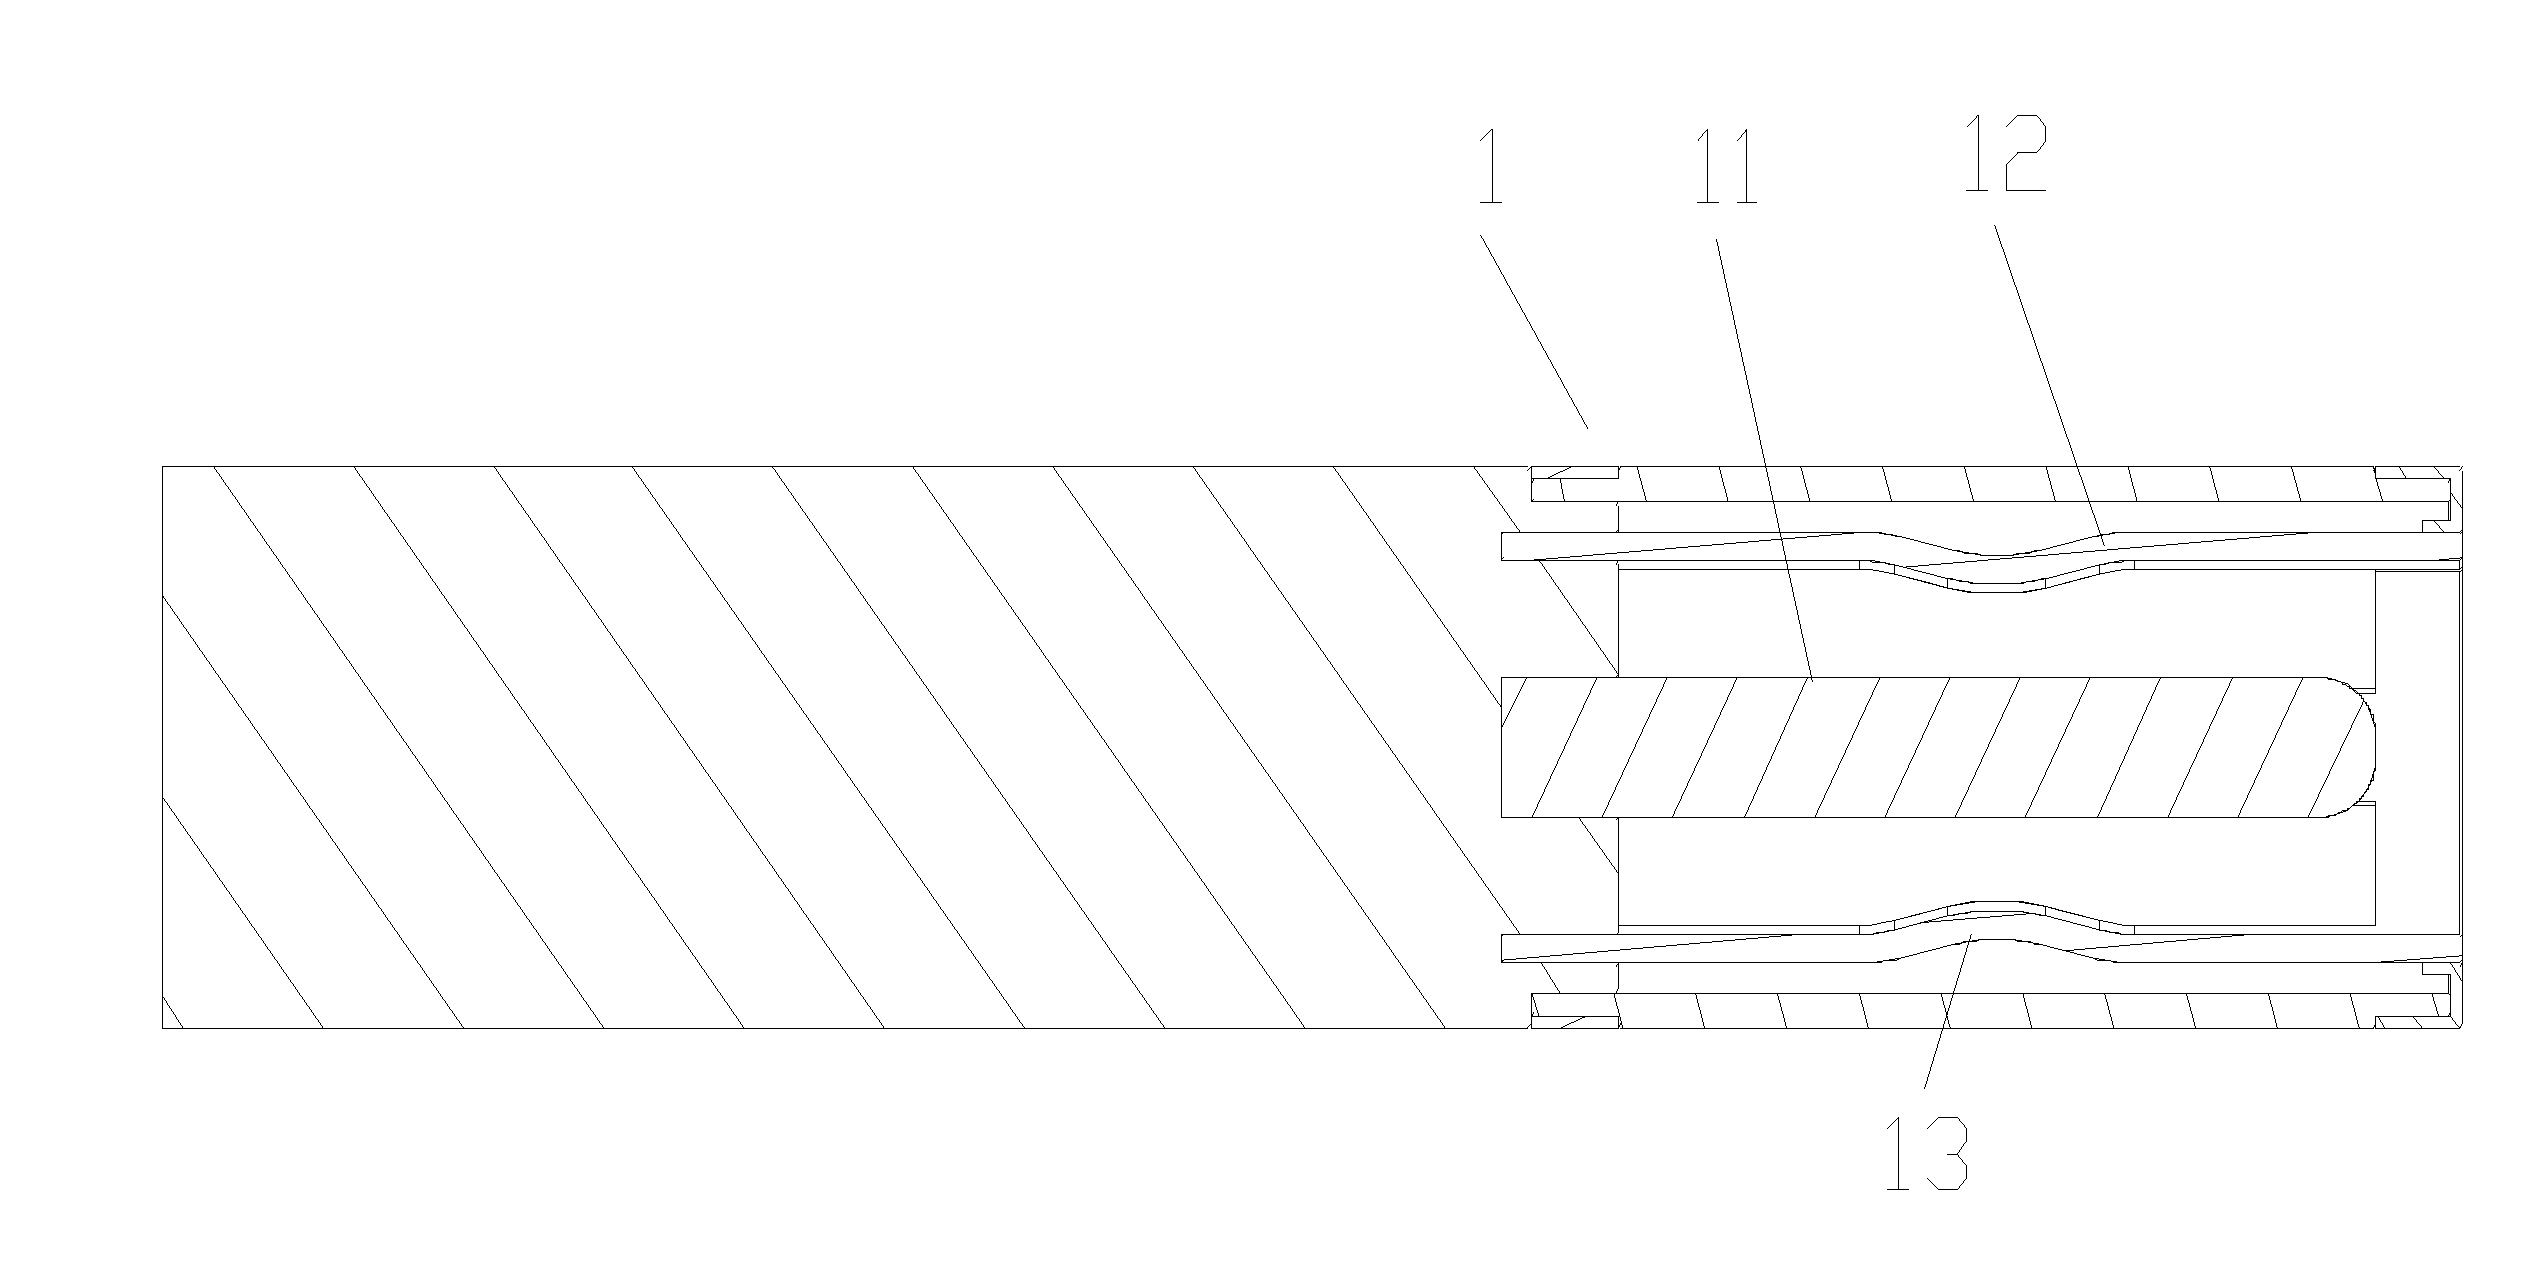 Metal leaf-spring-type connector for electronic cigarette devices